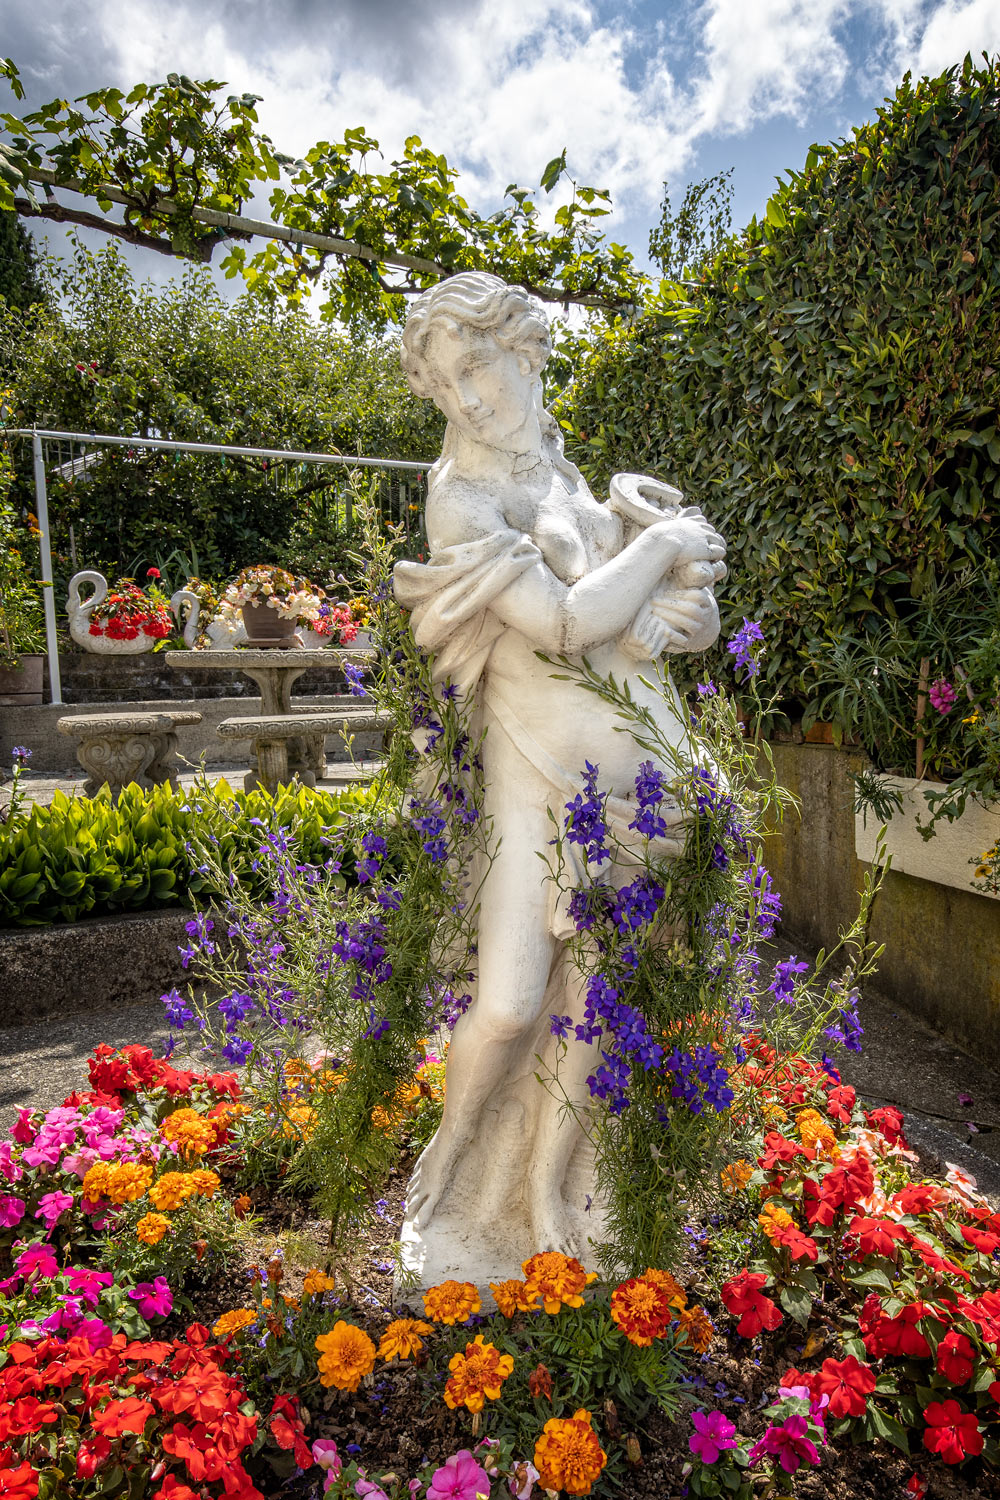 Statue of a Lady standing in a garden surrounded by flowers.